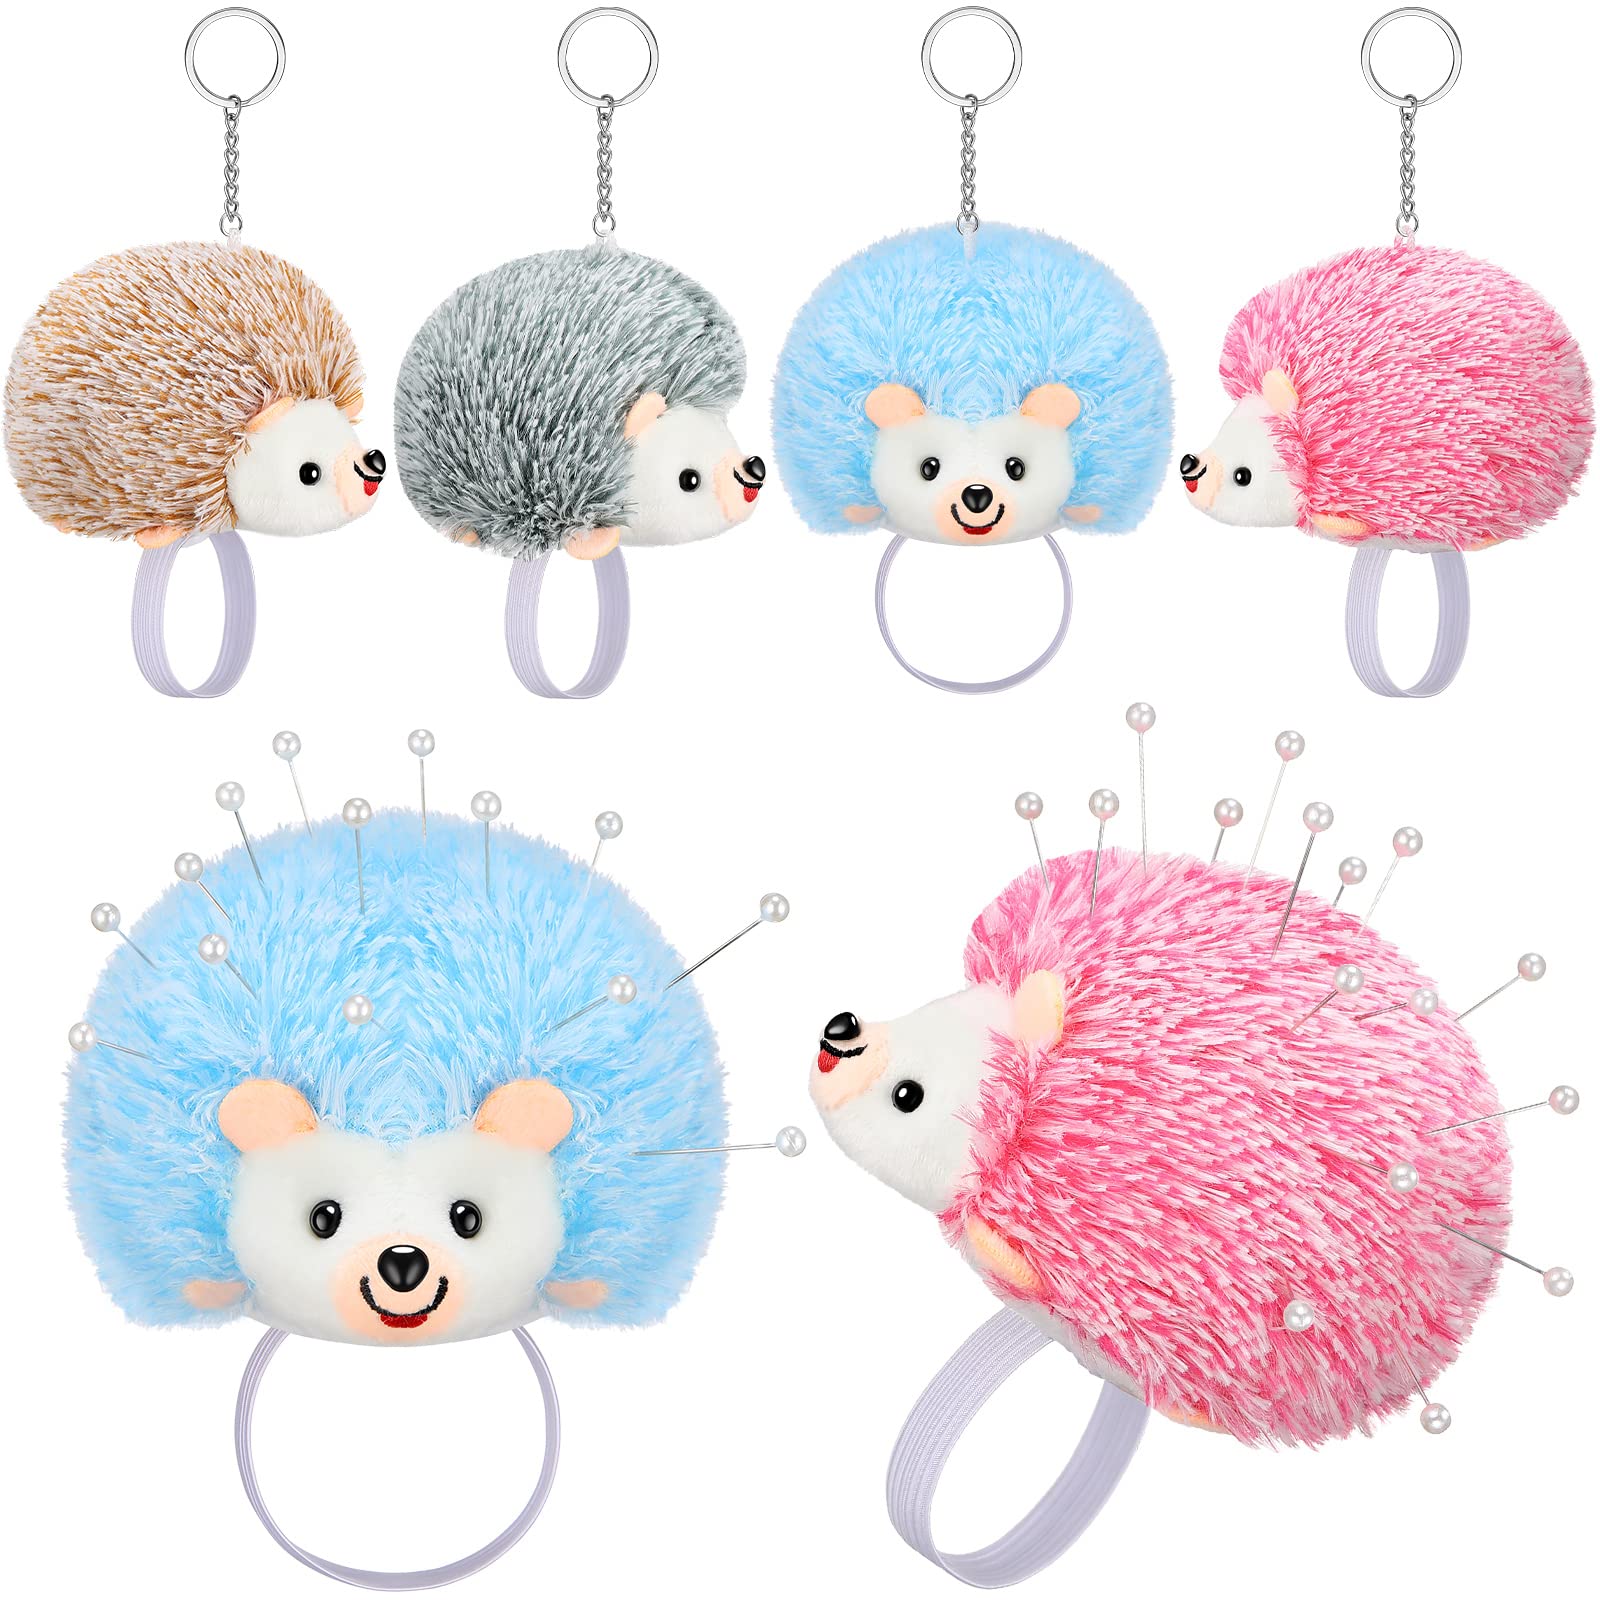 CICILIAYA Hedgehog Shape Pin Cushion, Cute Pincushions Sewing Kit Lovely  Needle Cushions Pins Holder Sewing Accessories Supplies with 100Pcs Colored